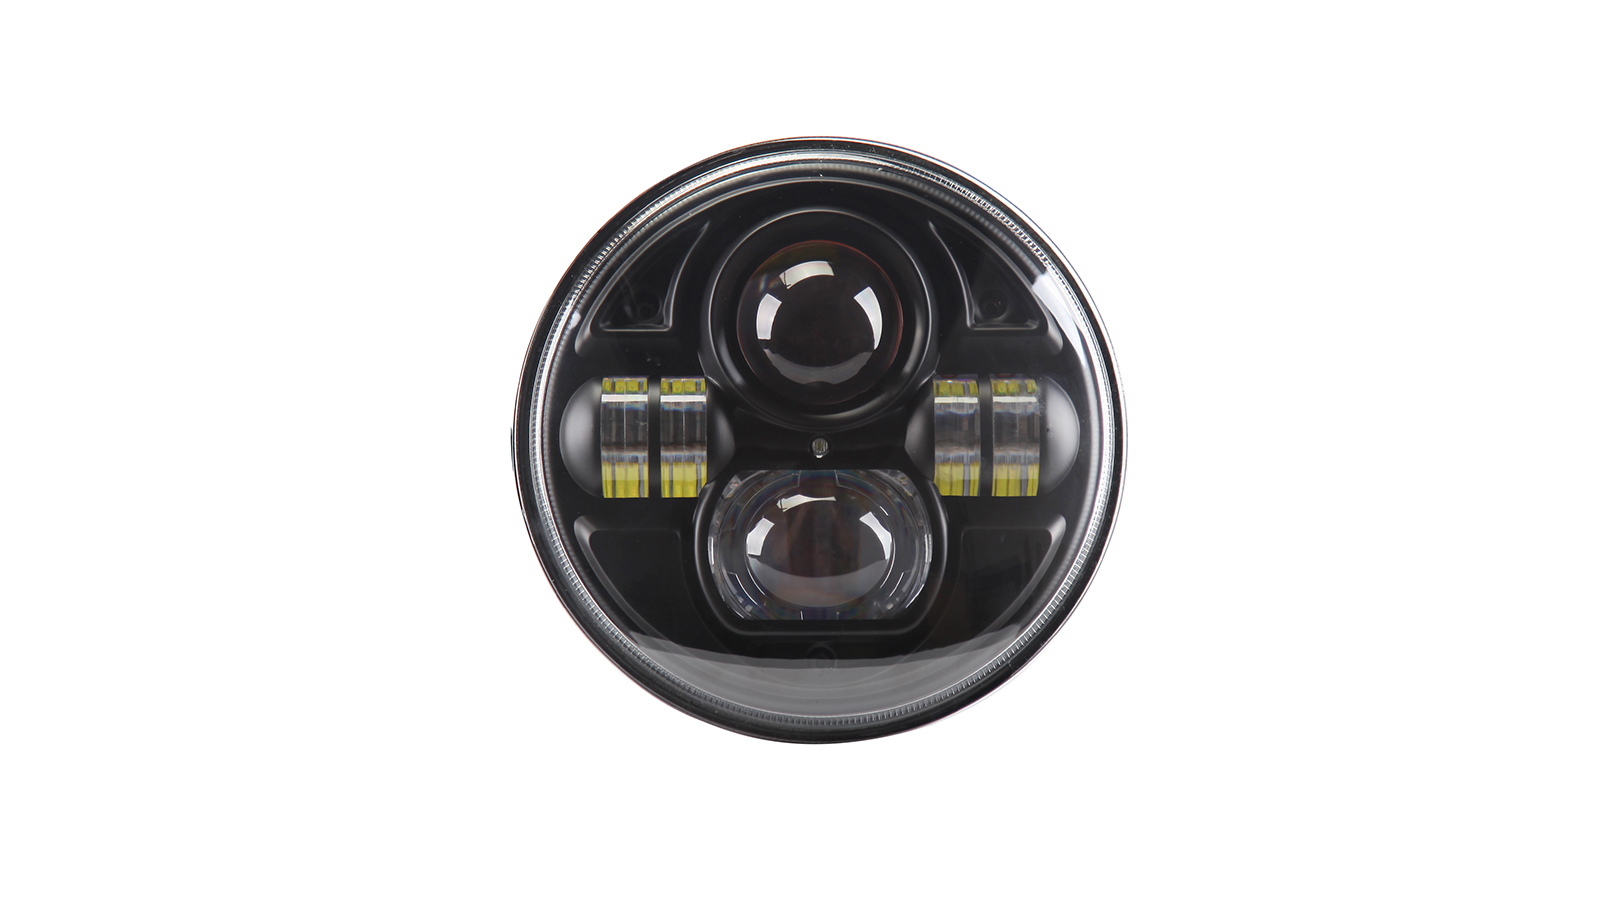 New Model Type 73W IP68 7 Inch Hi-Low Beam With position Lighting Homologation certificate